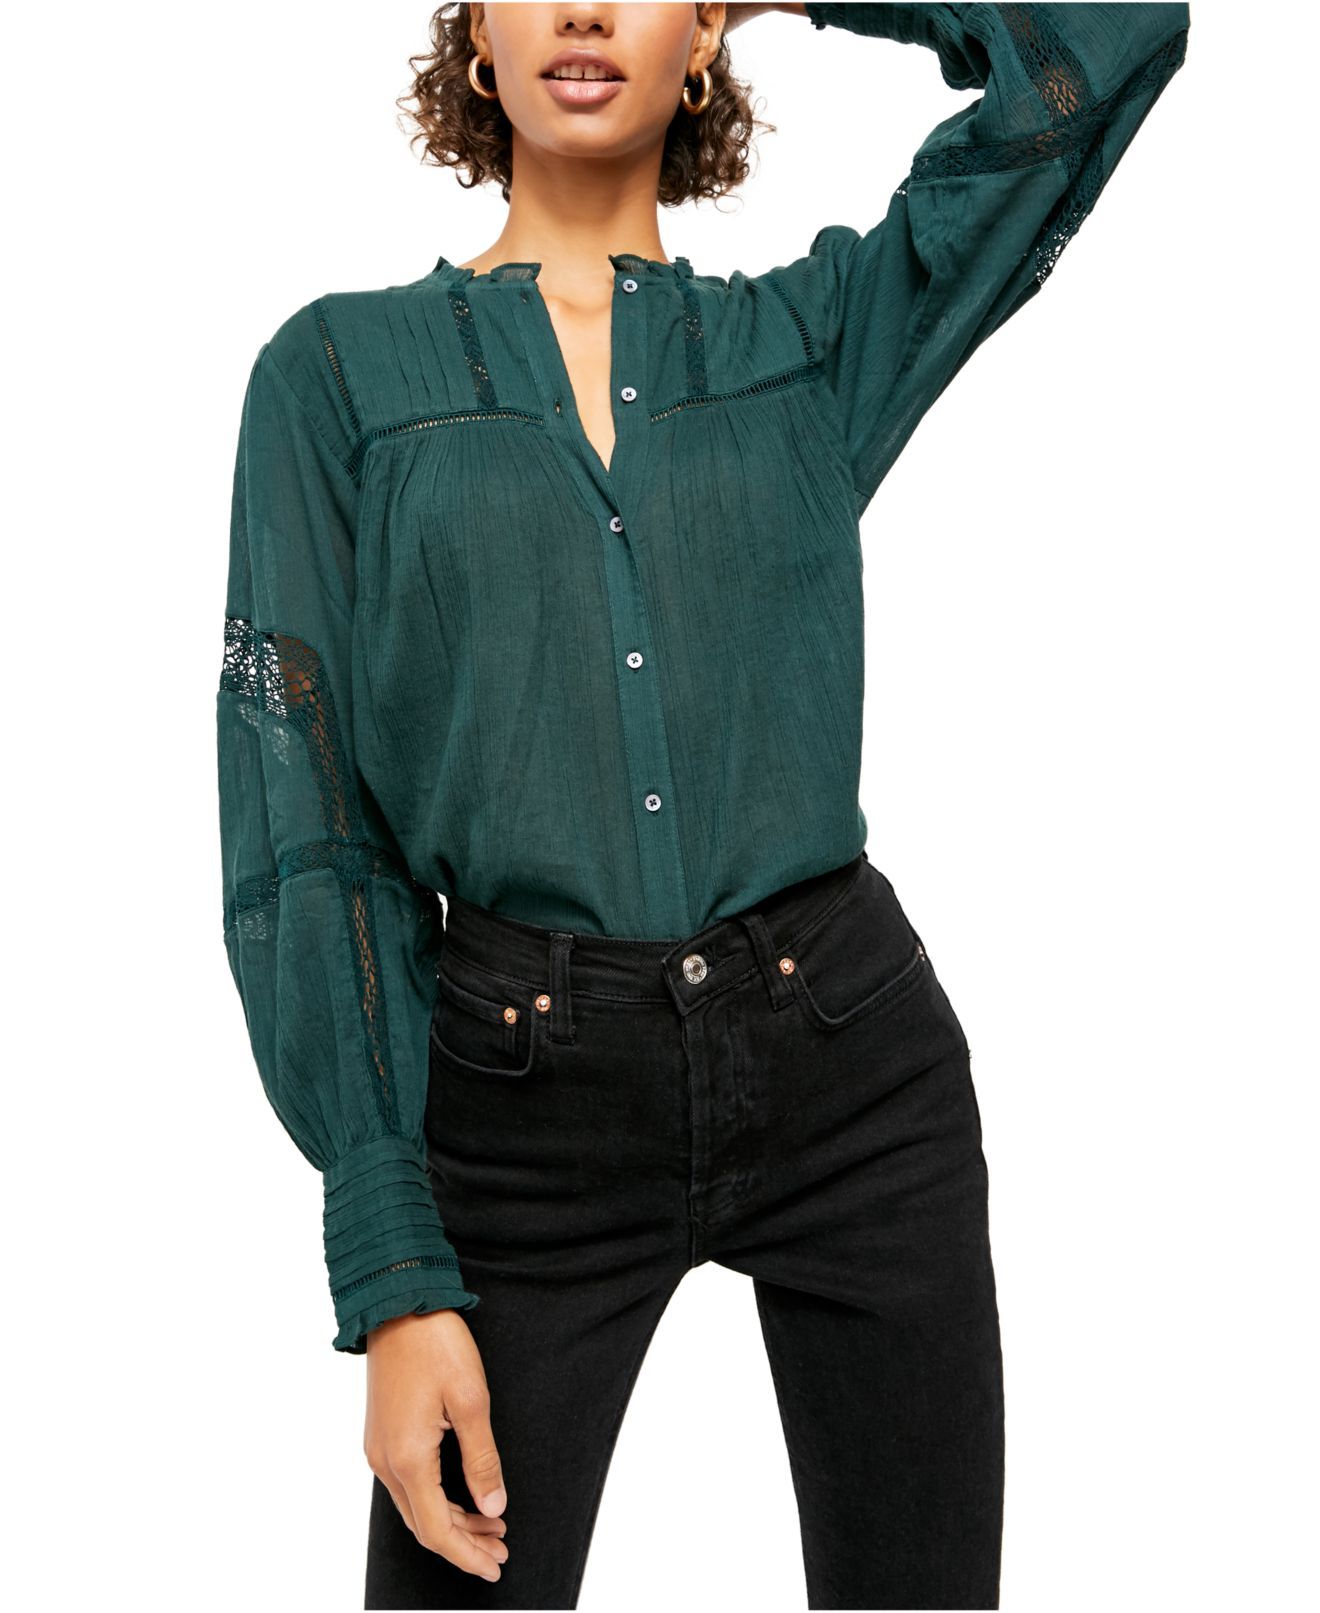 Color: Greens Size Type: Regular Size (Women's): L Sleeve Length: Long Sleeve Type: Blouse Style: Basic Neckline: Collared Pattern: Solid Theme: Peasant Material: 100% Cotton